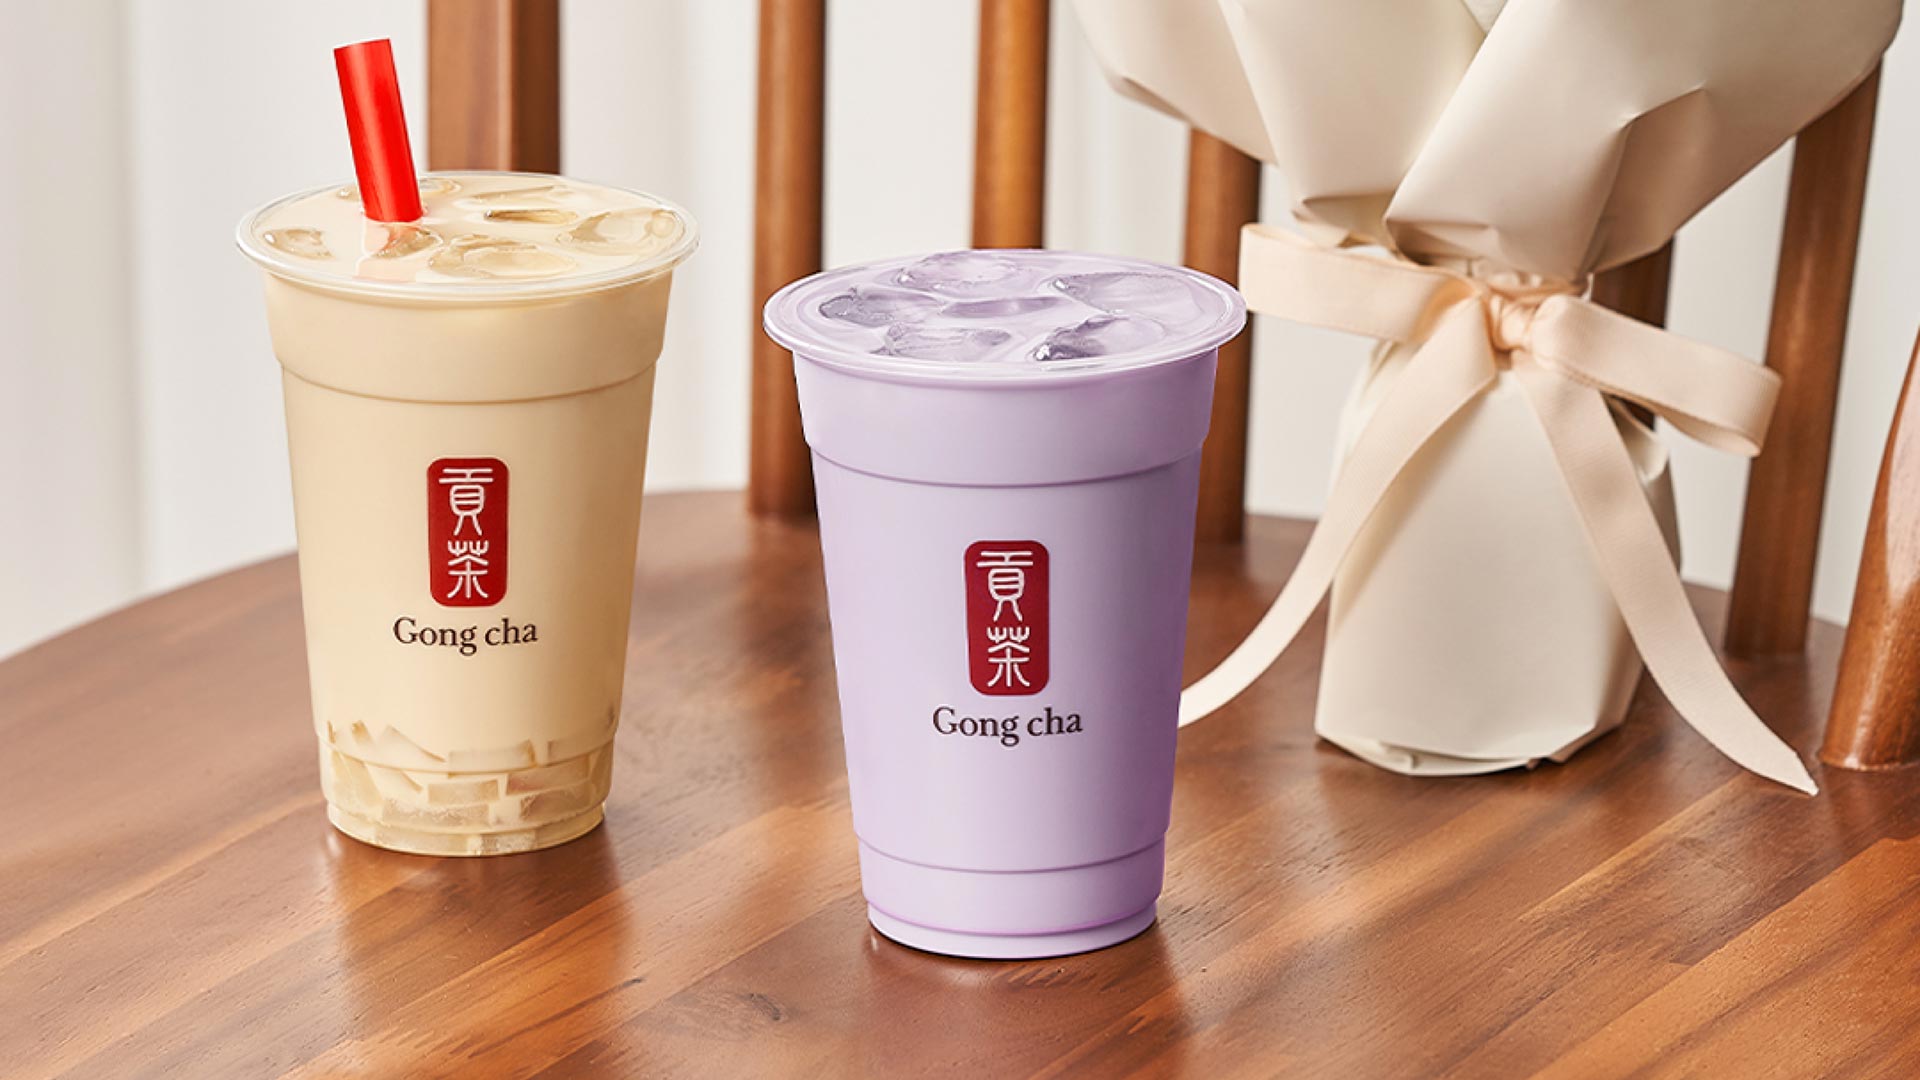 Gong cha drinks on chair